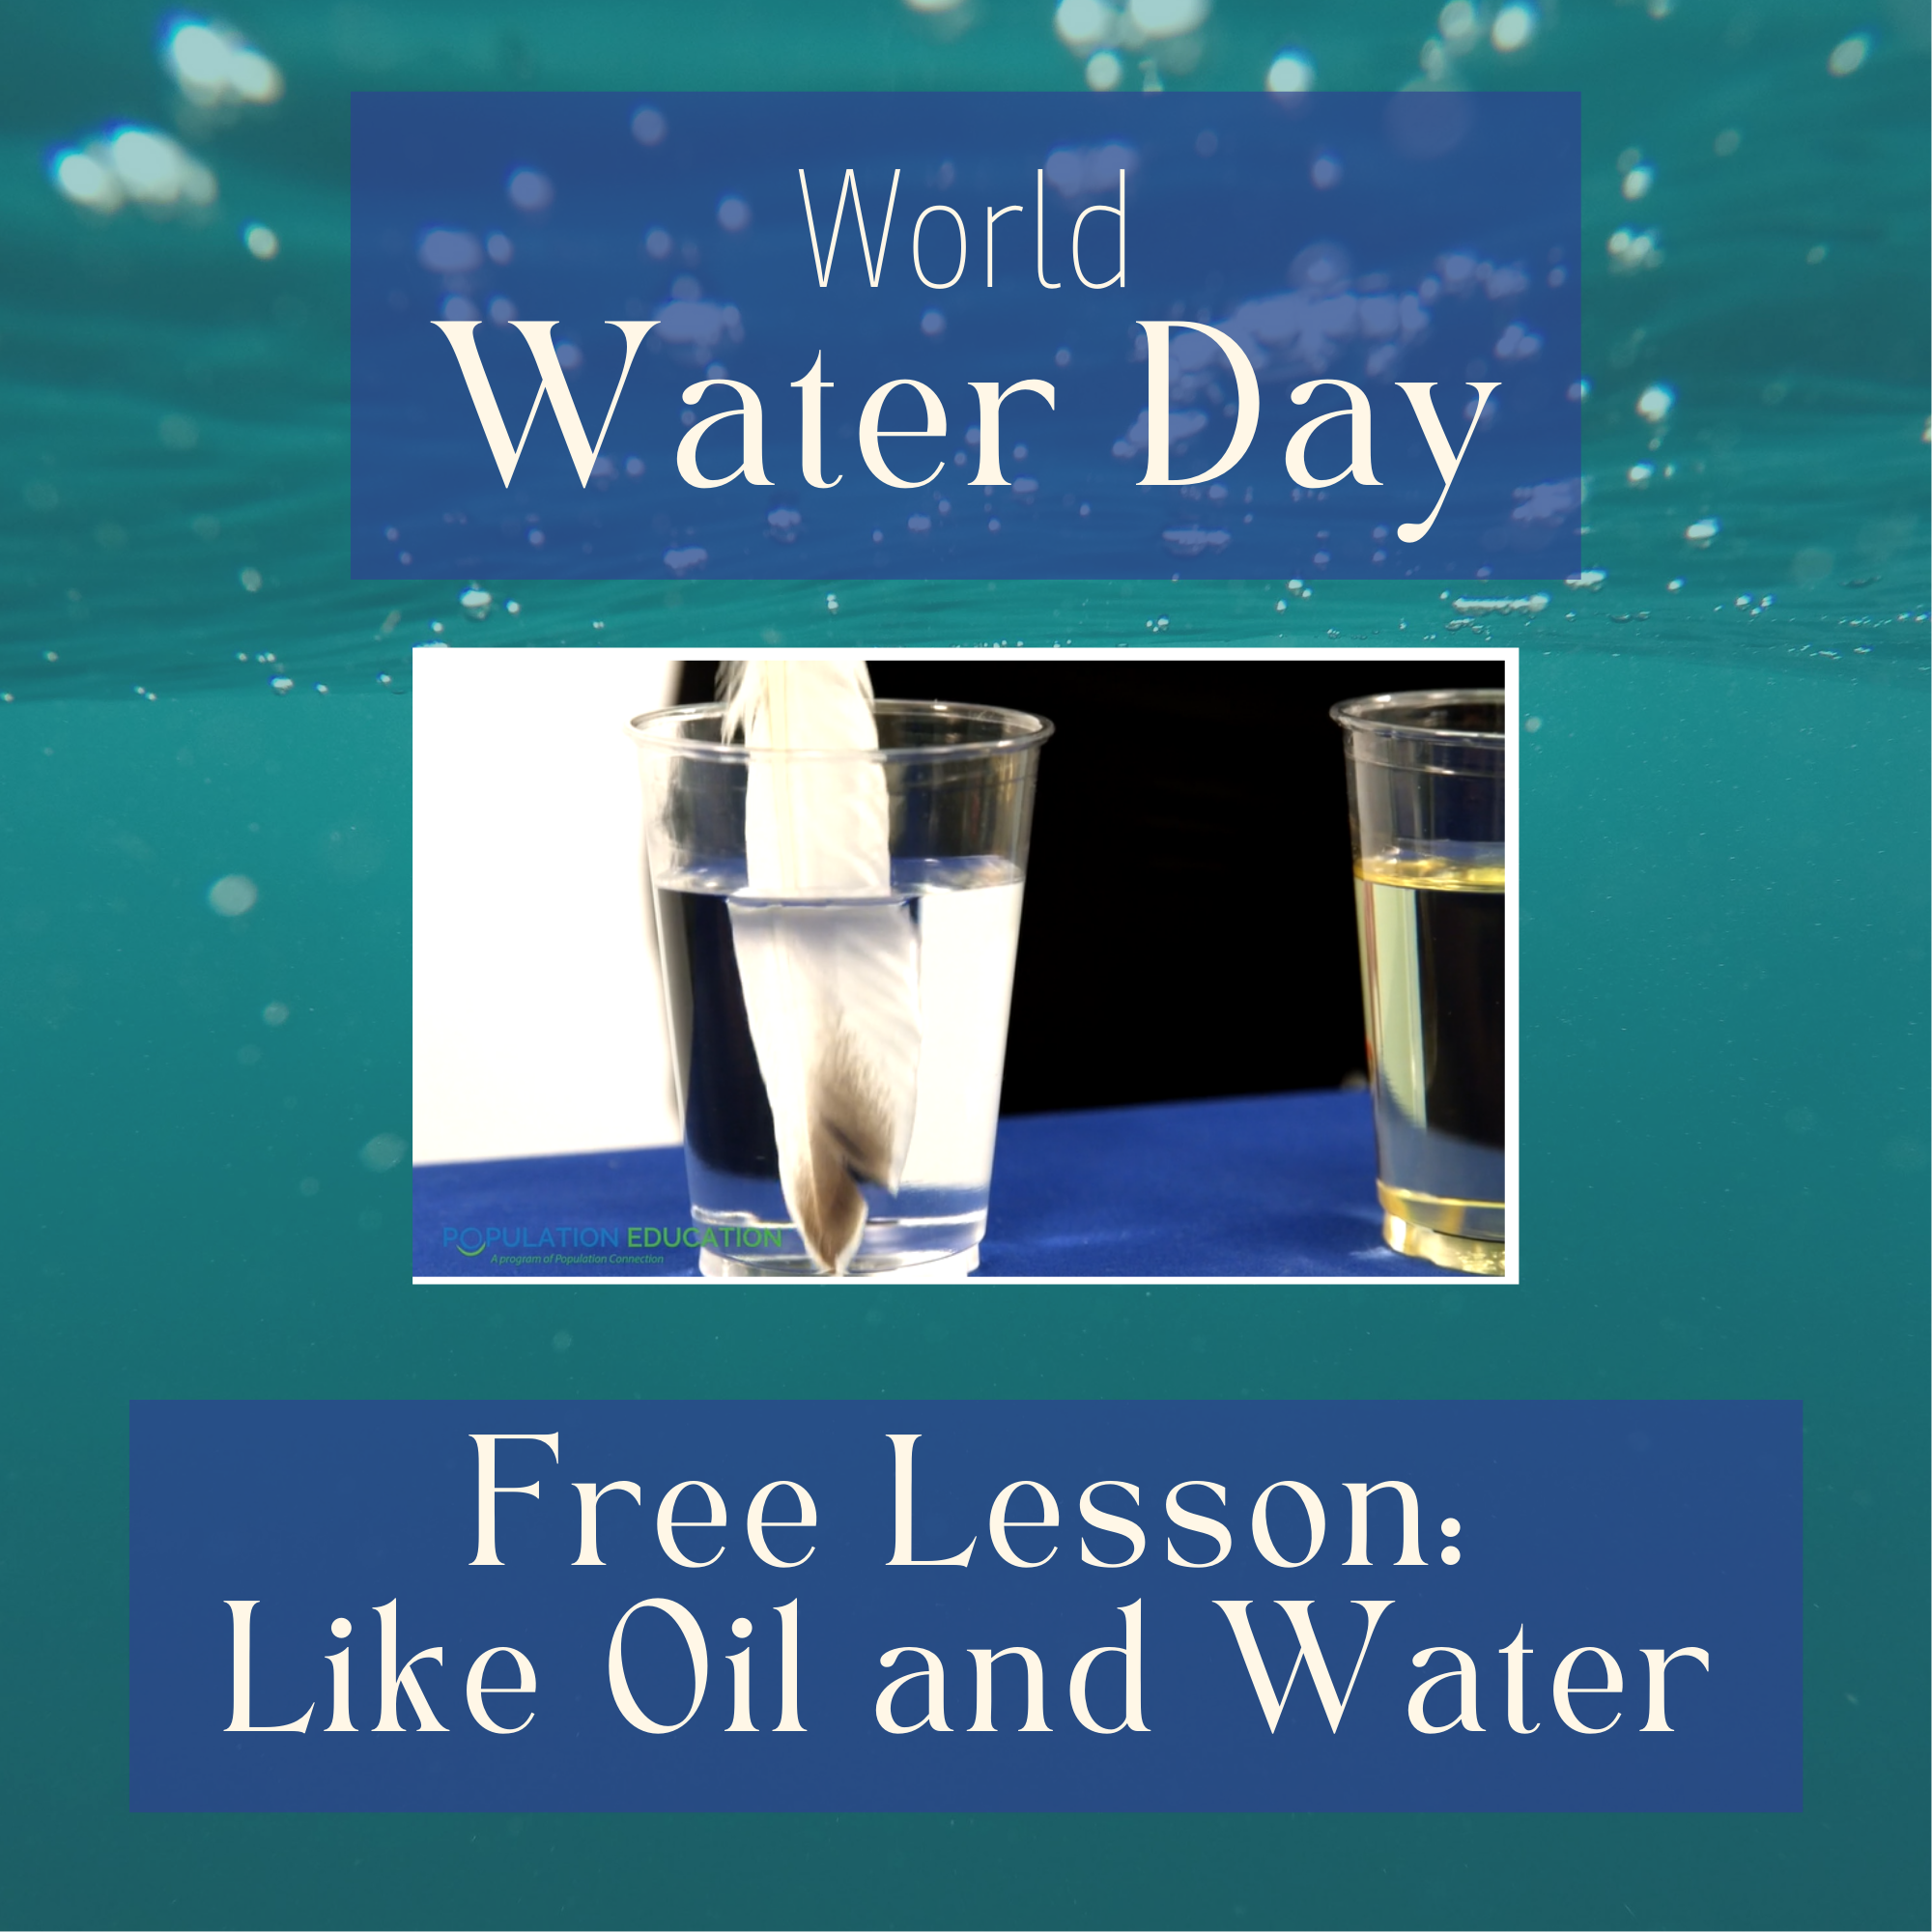 World Water Day-Like Oil and Water